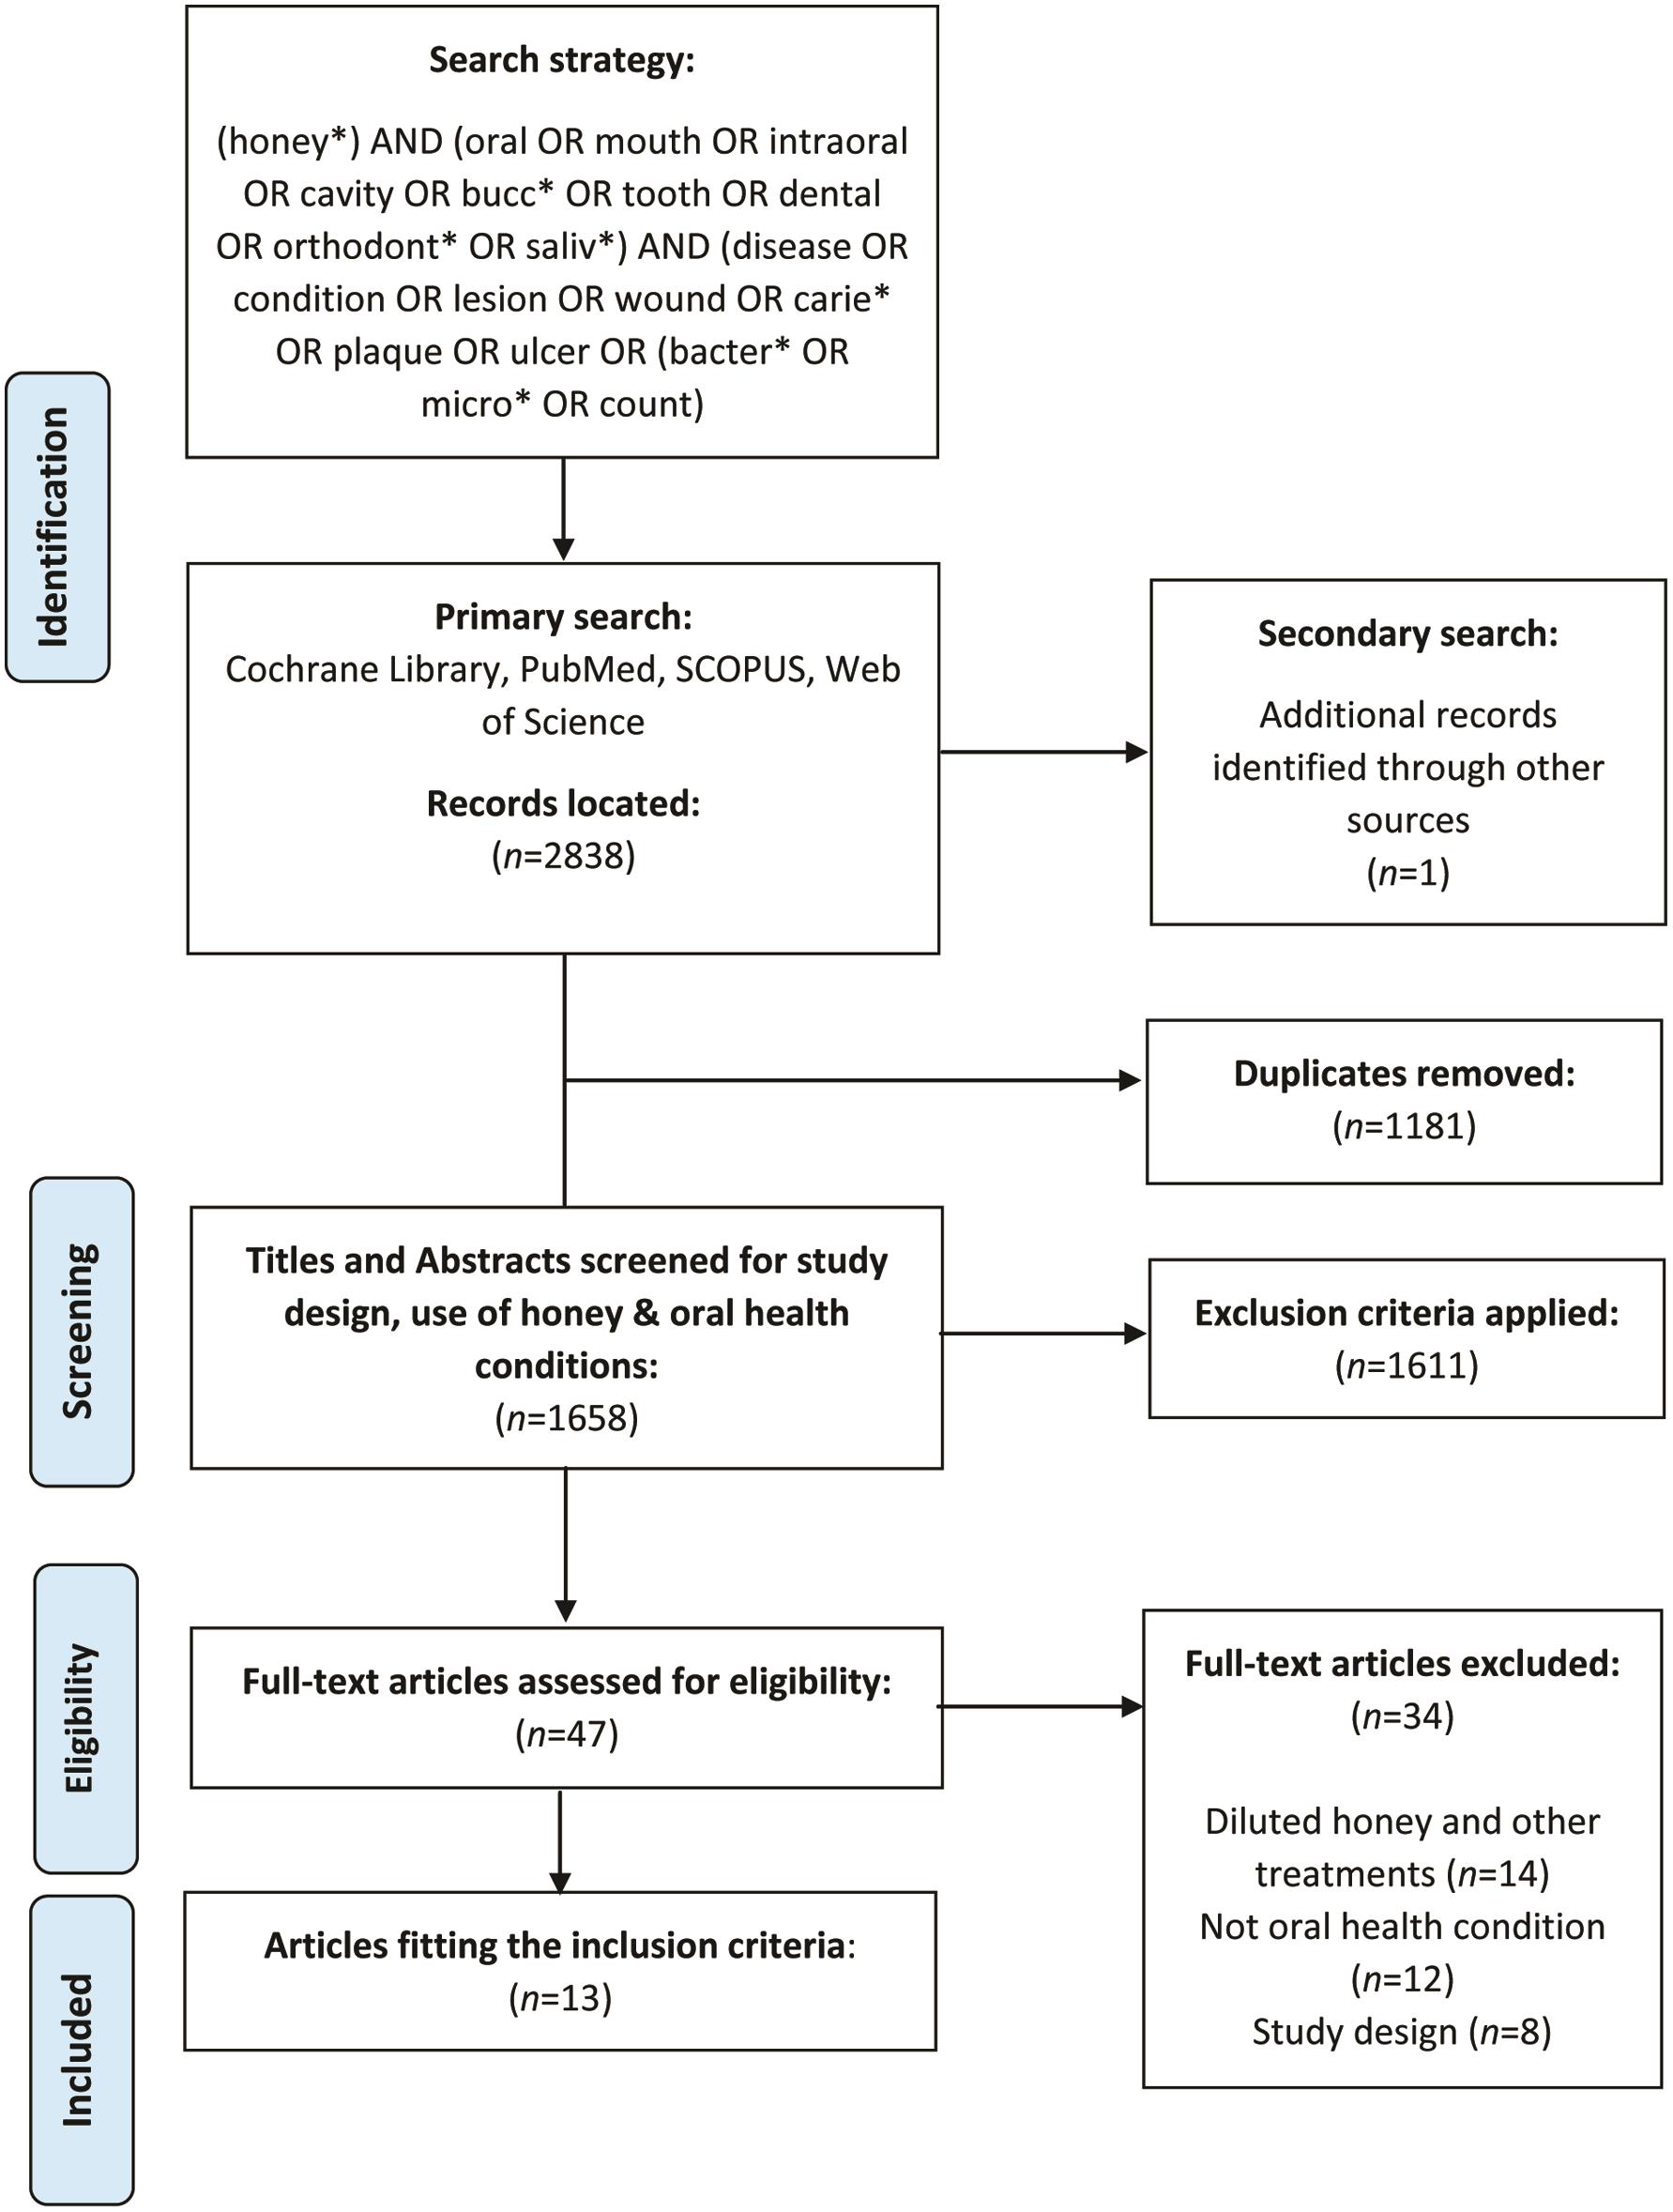 Search strategy and article selection process according to the Preferred Reporting Items for Systematic Reviews and Meta-Analyses (PRISMA) Guidelines.